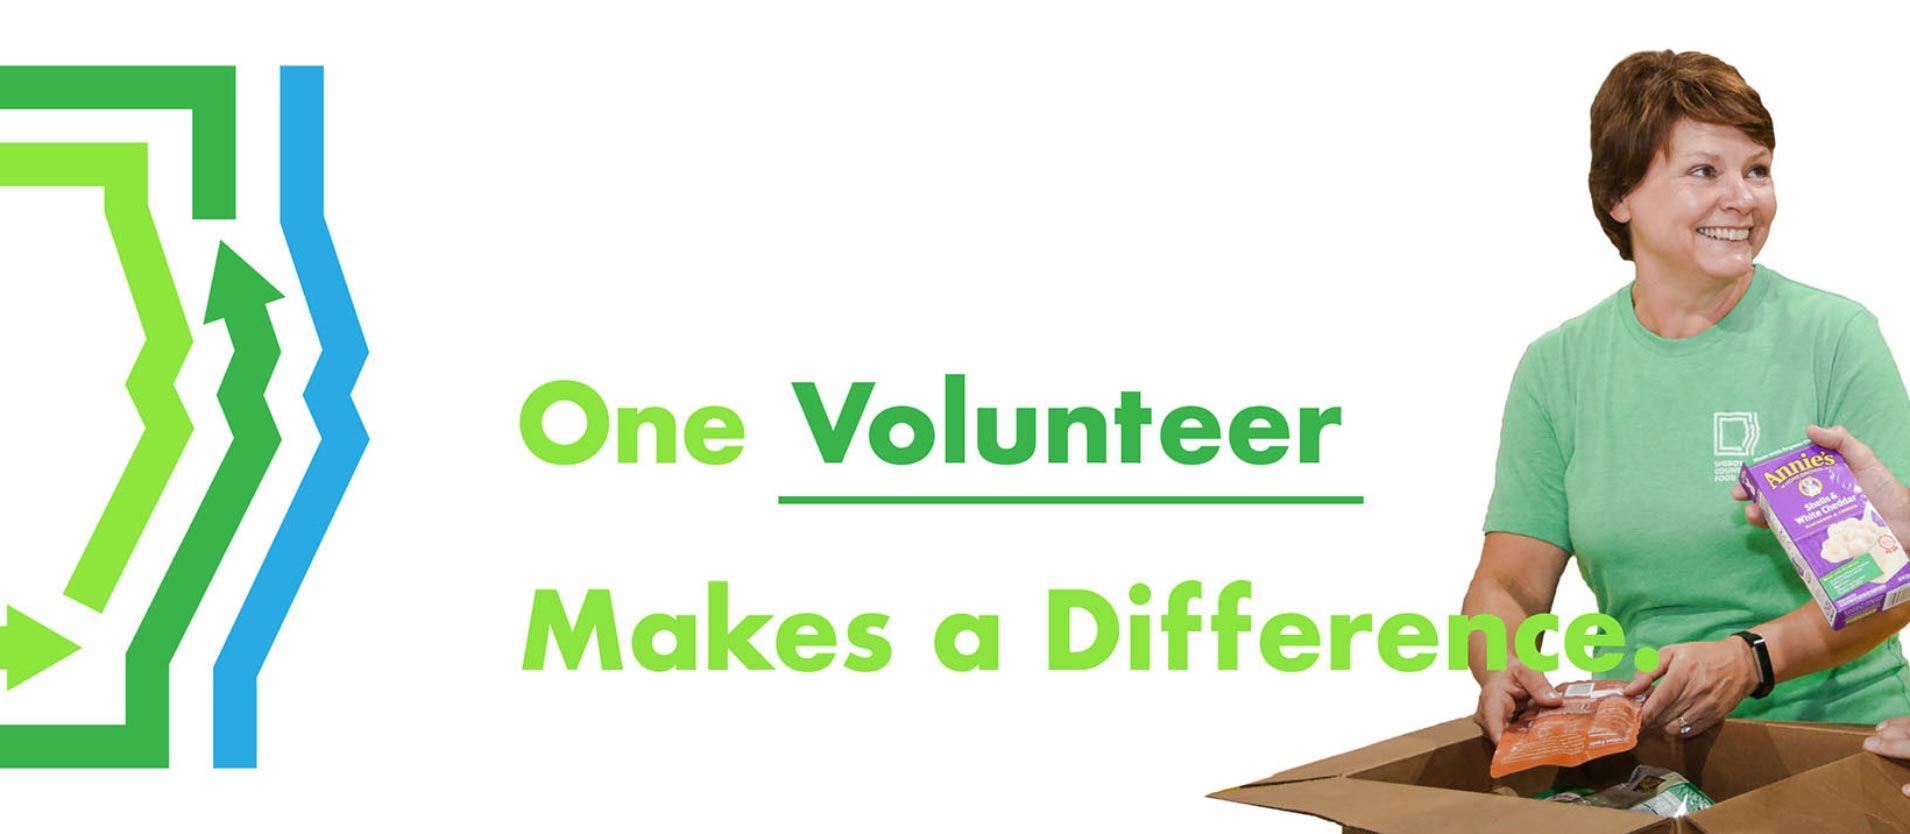 One-Volunteer-Makes-Difference12-1910x834_c_optimised